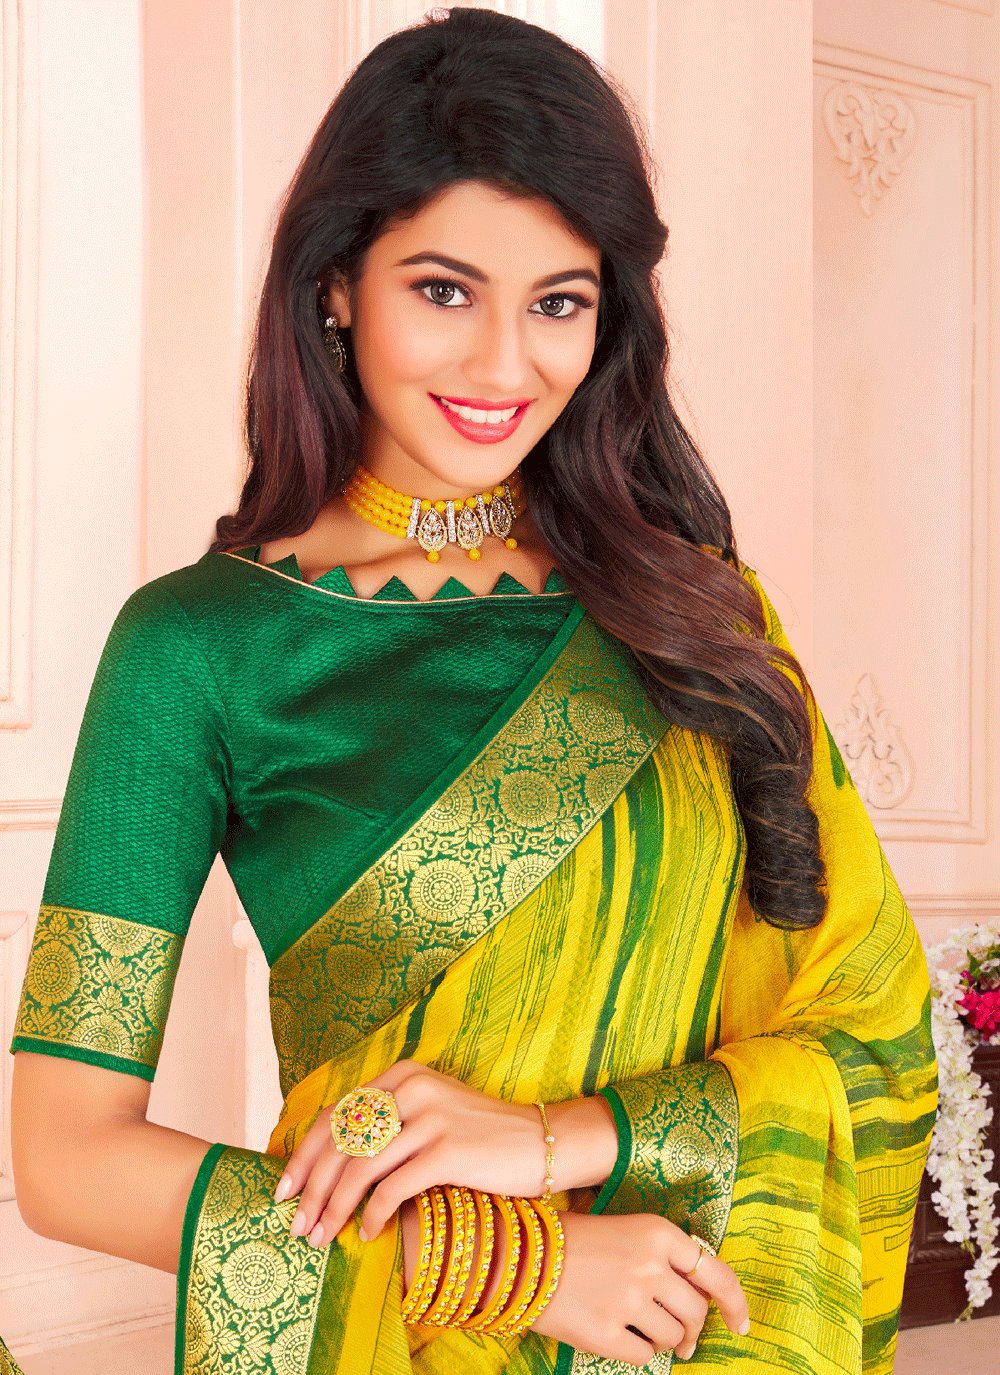 Add More Sunshine With These 5 Best Blouse Combinations For Yellow  Kanjeevarams | Light green blouse, Green blouse designs, Pattu saree blouse  designs